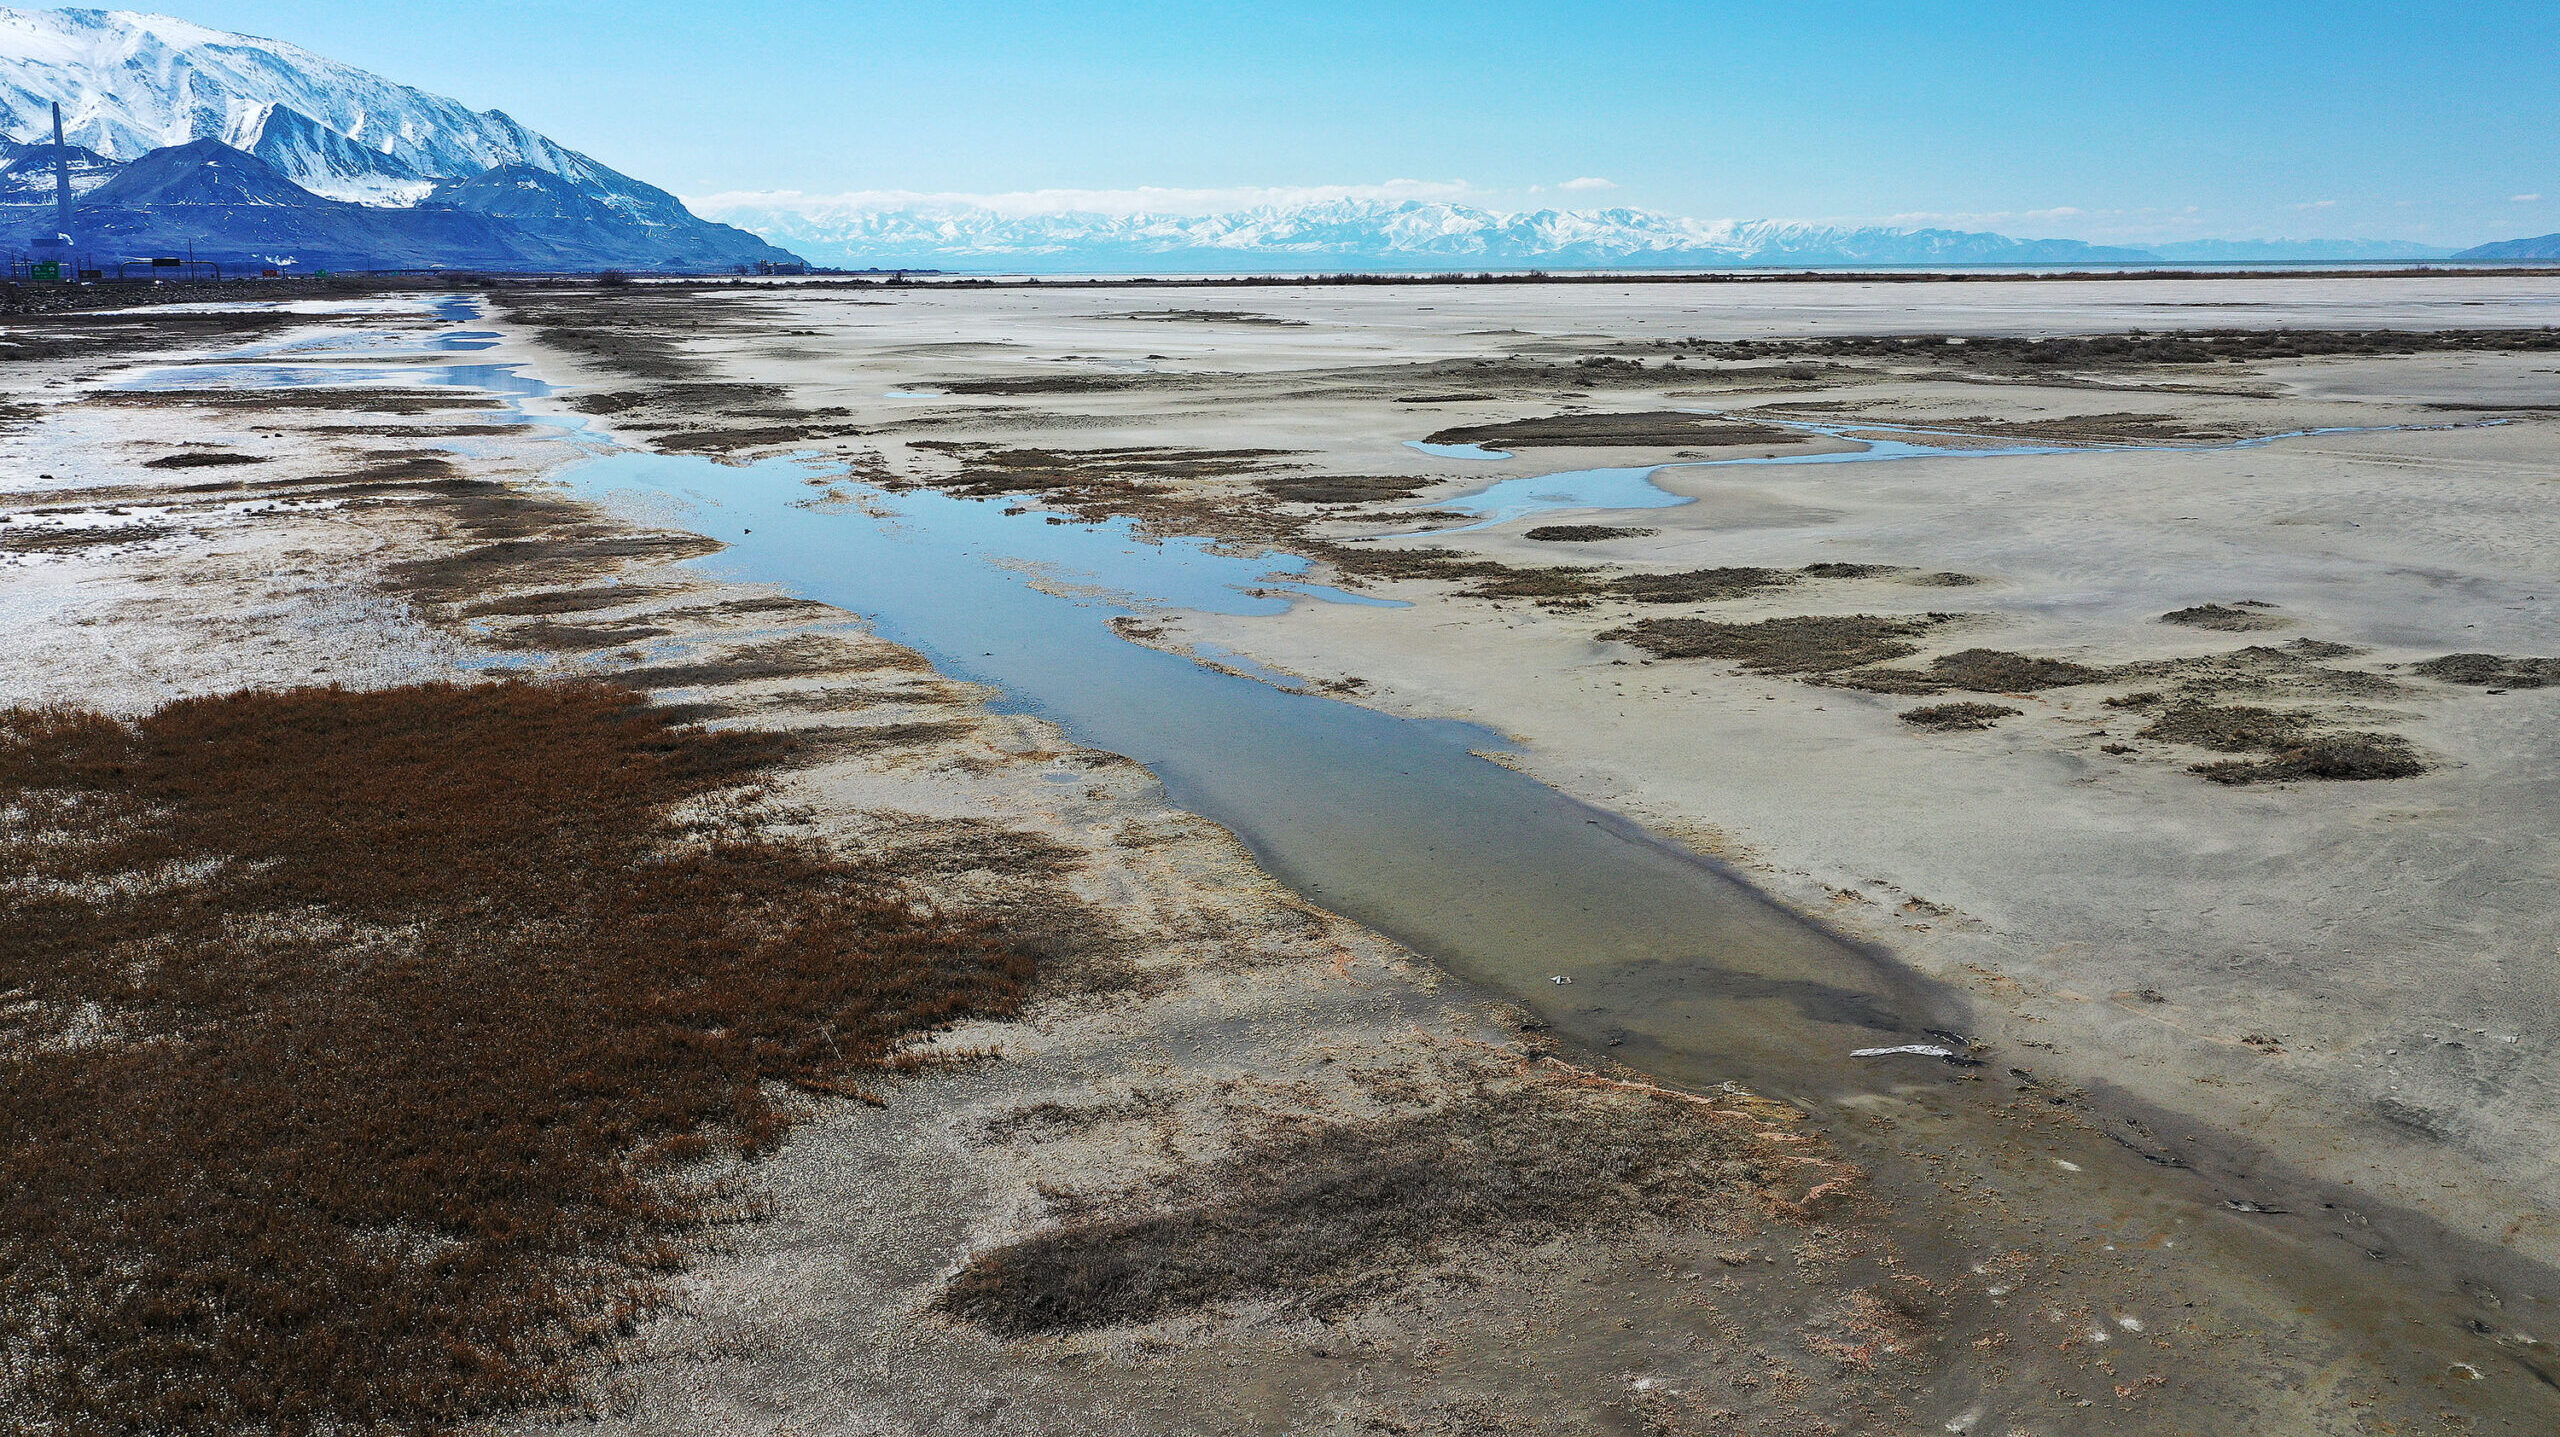 the great salt lake is pictured...